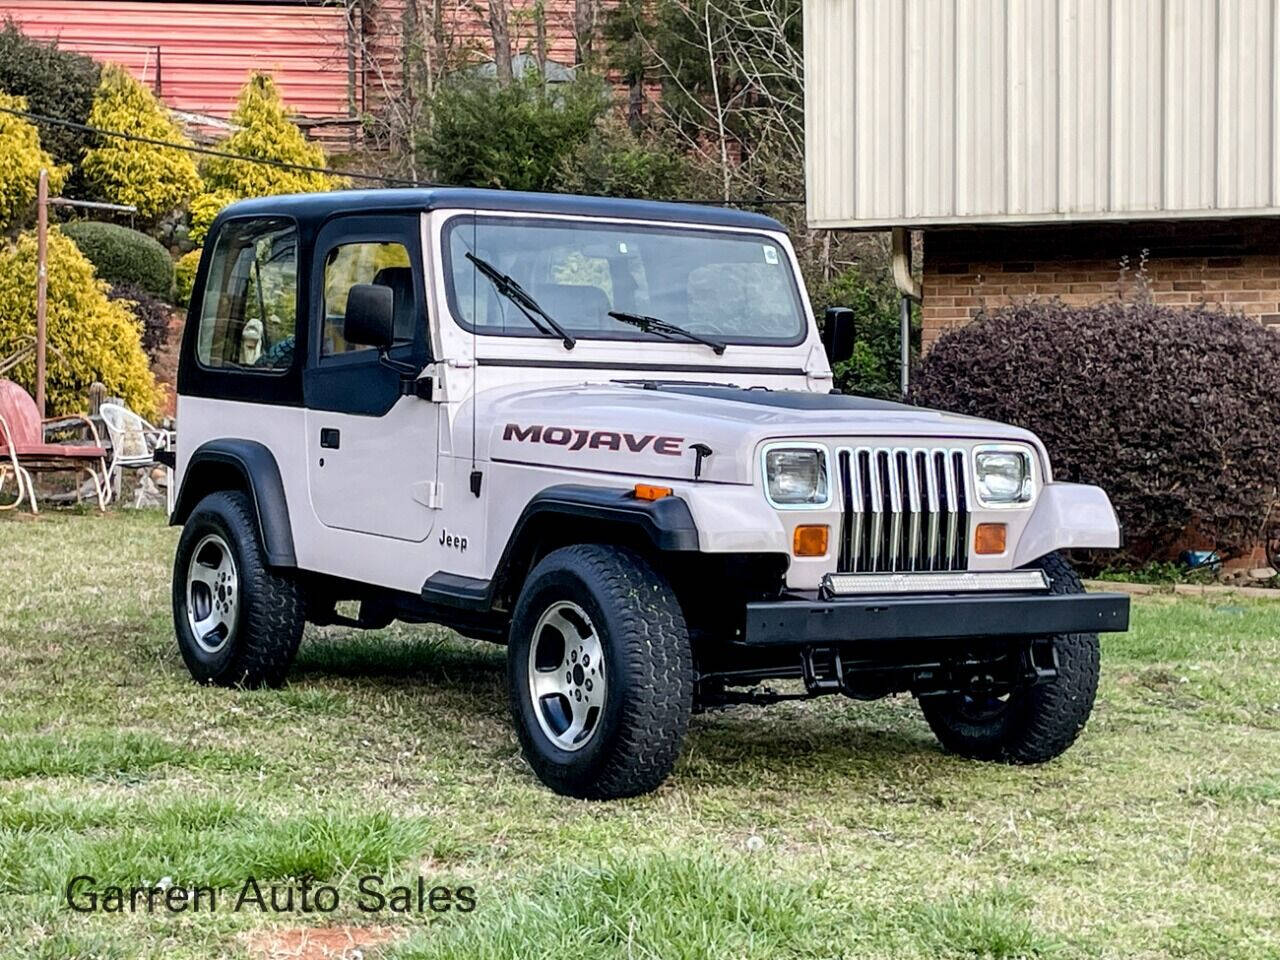 1995 Jeep Wrangler For Sale In Fort Myers, FL ®